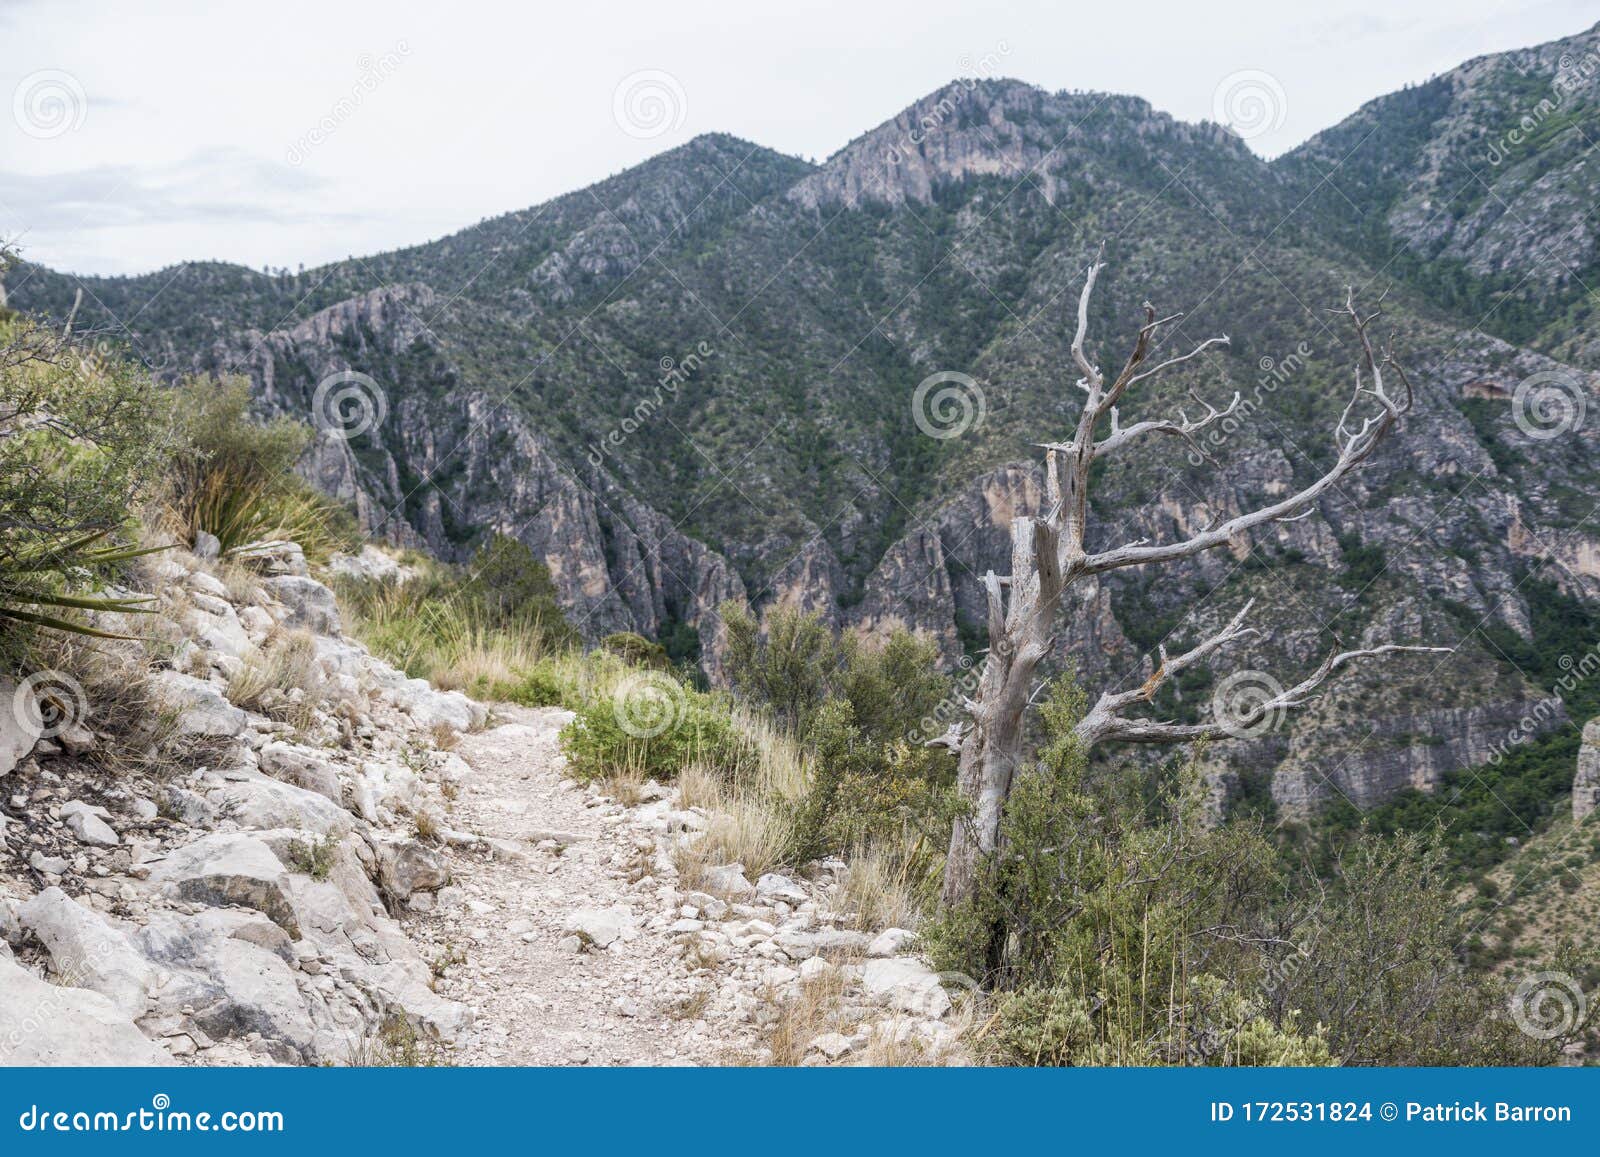 Guadalupe Mountains National Park Travel Guide - Expert 